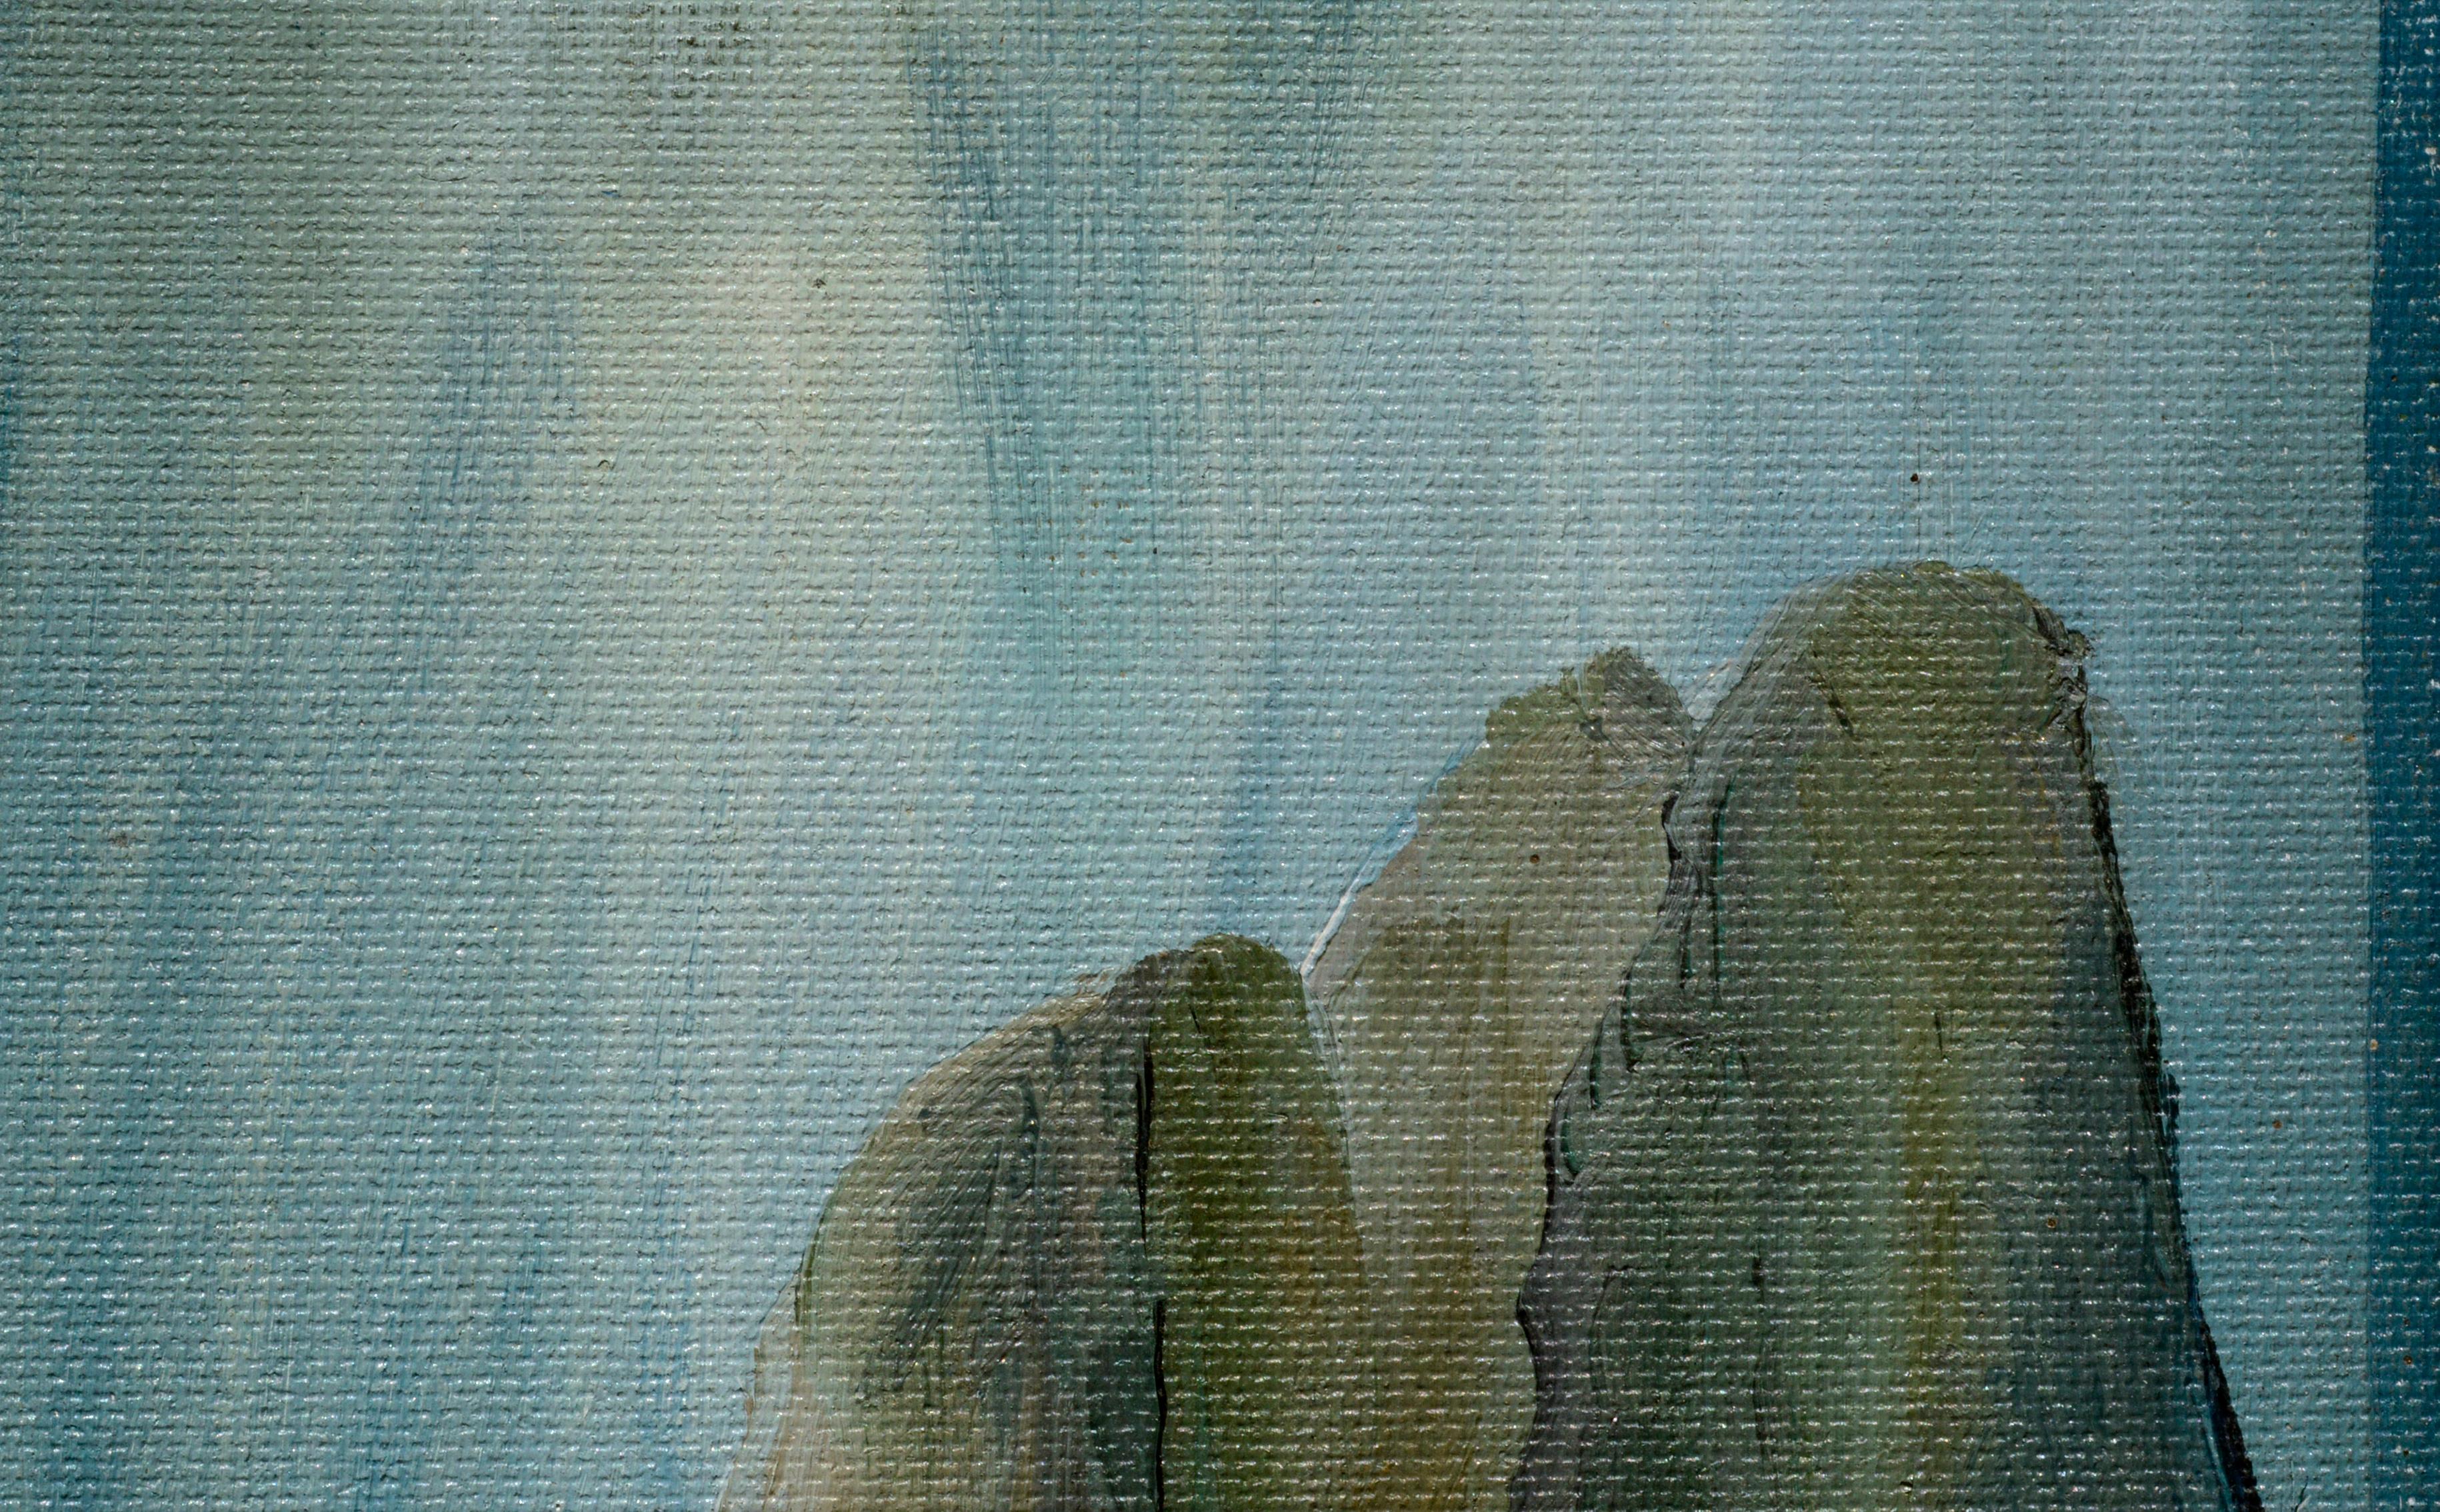 Three Large Cliffs in the Sea, Miniature Contemporary Coastal Seascape - Painting by Kathleen Murray